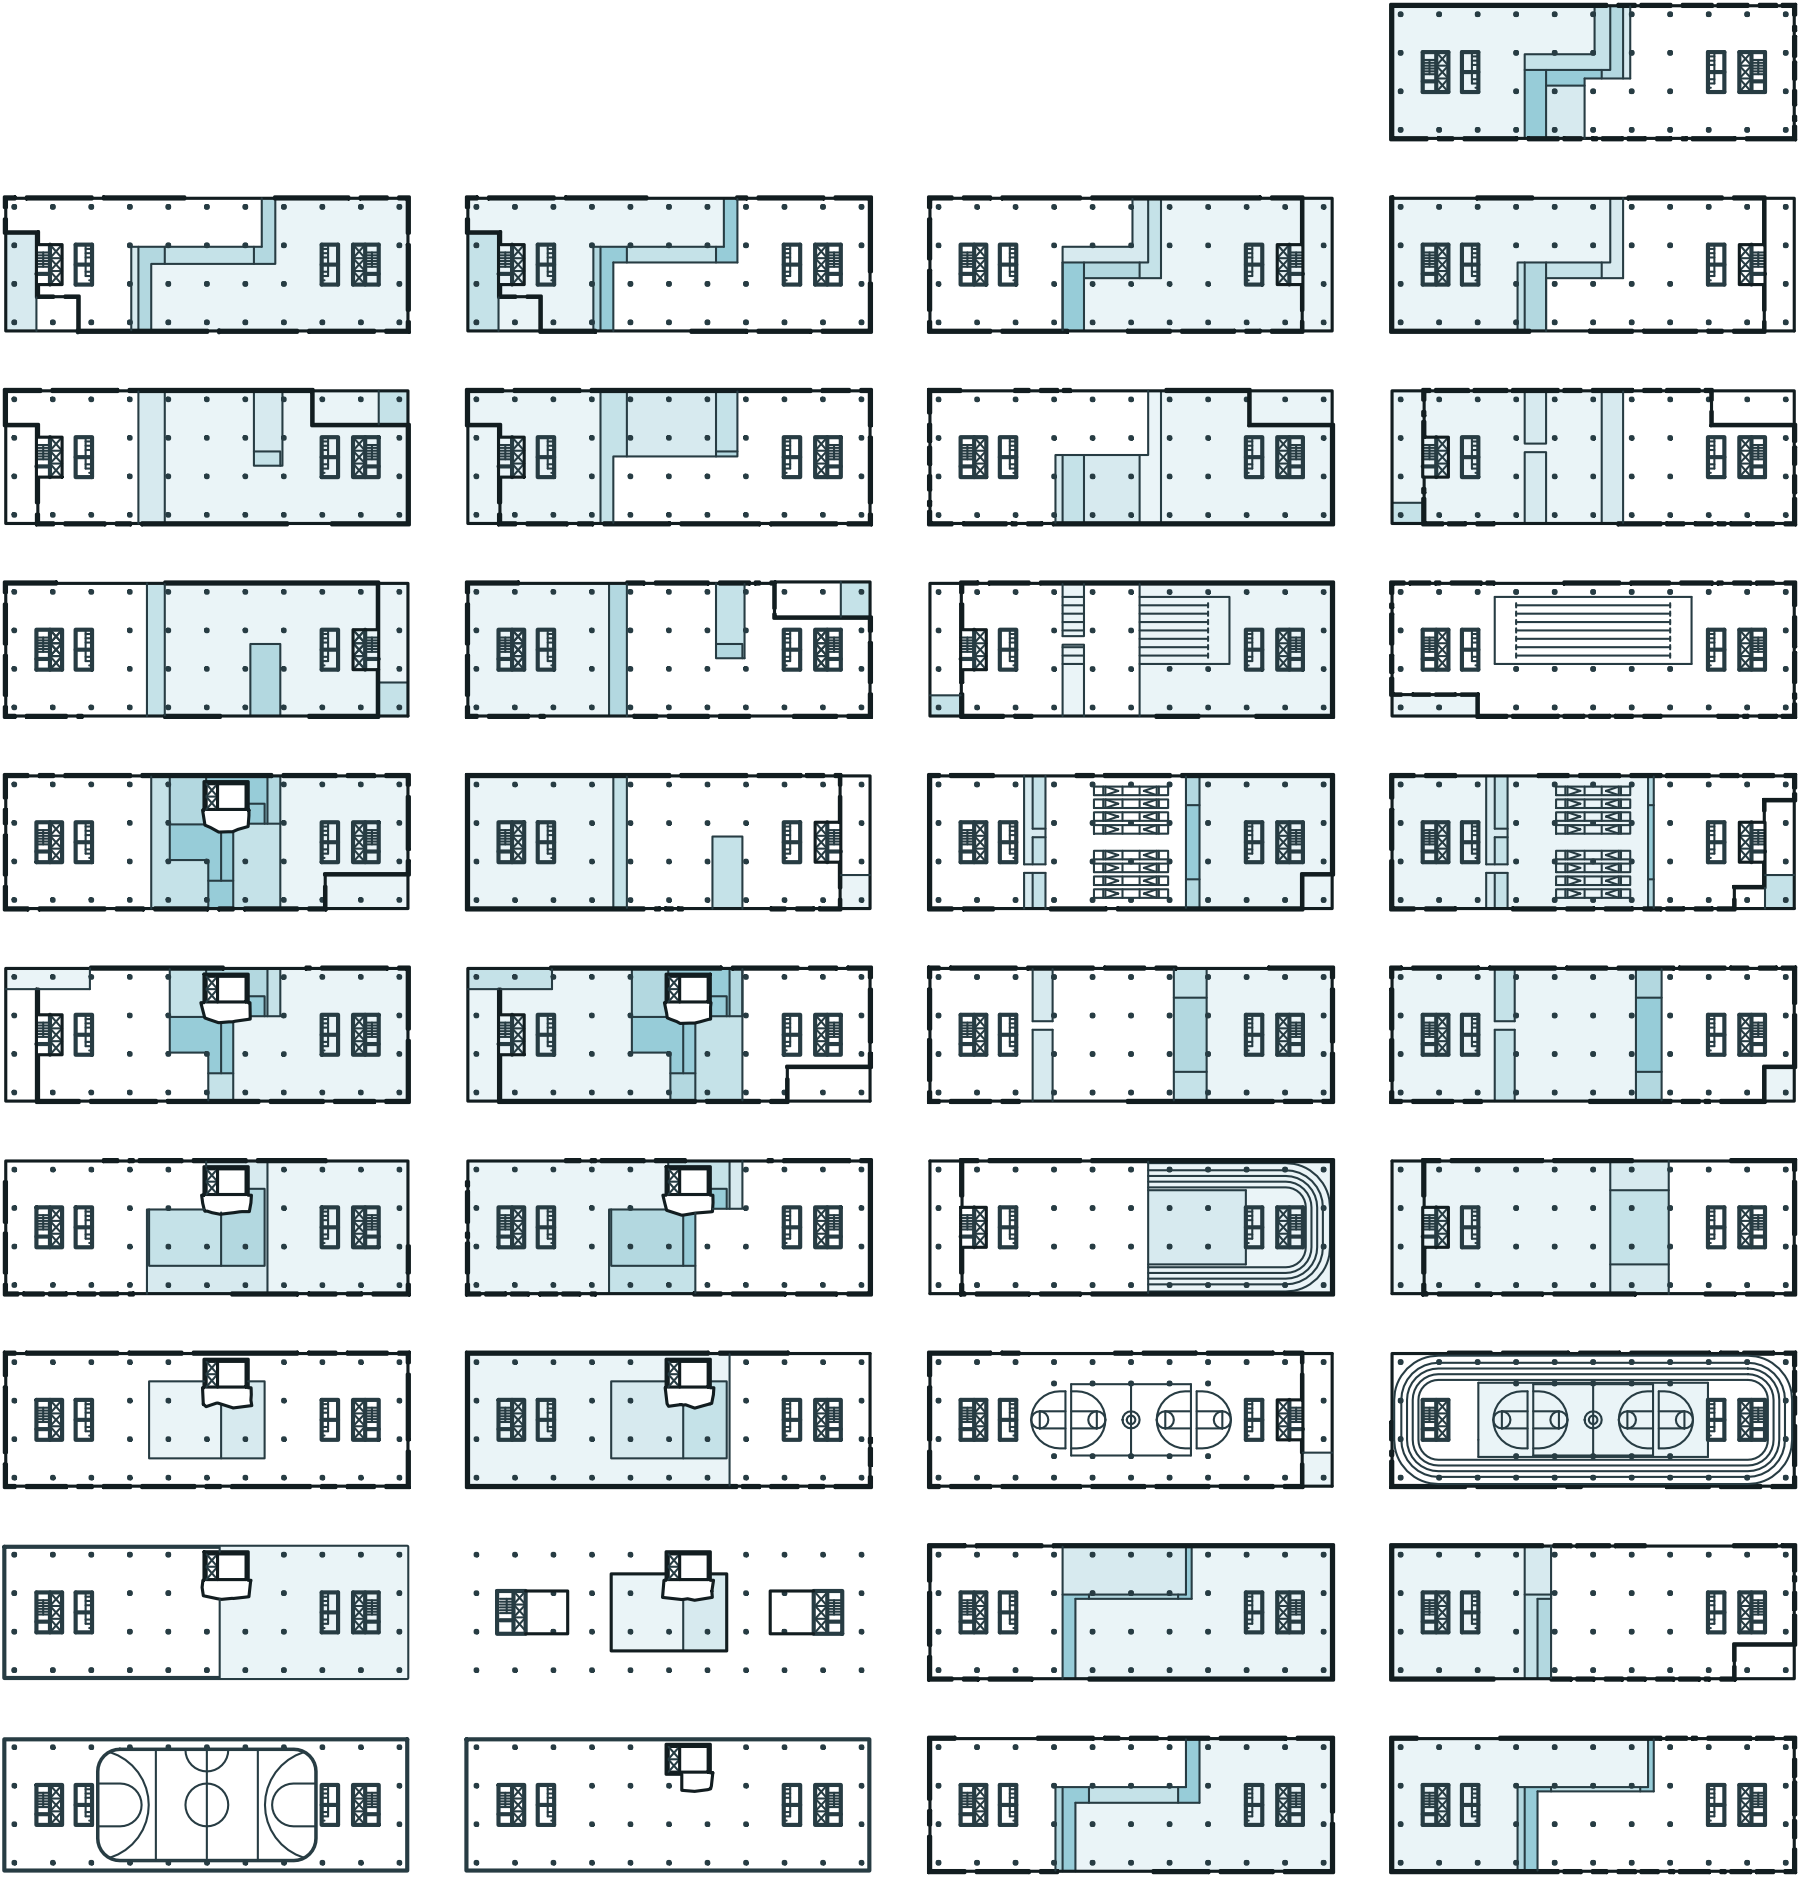 37 floor plans of the tower